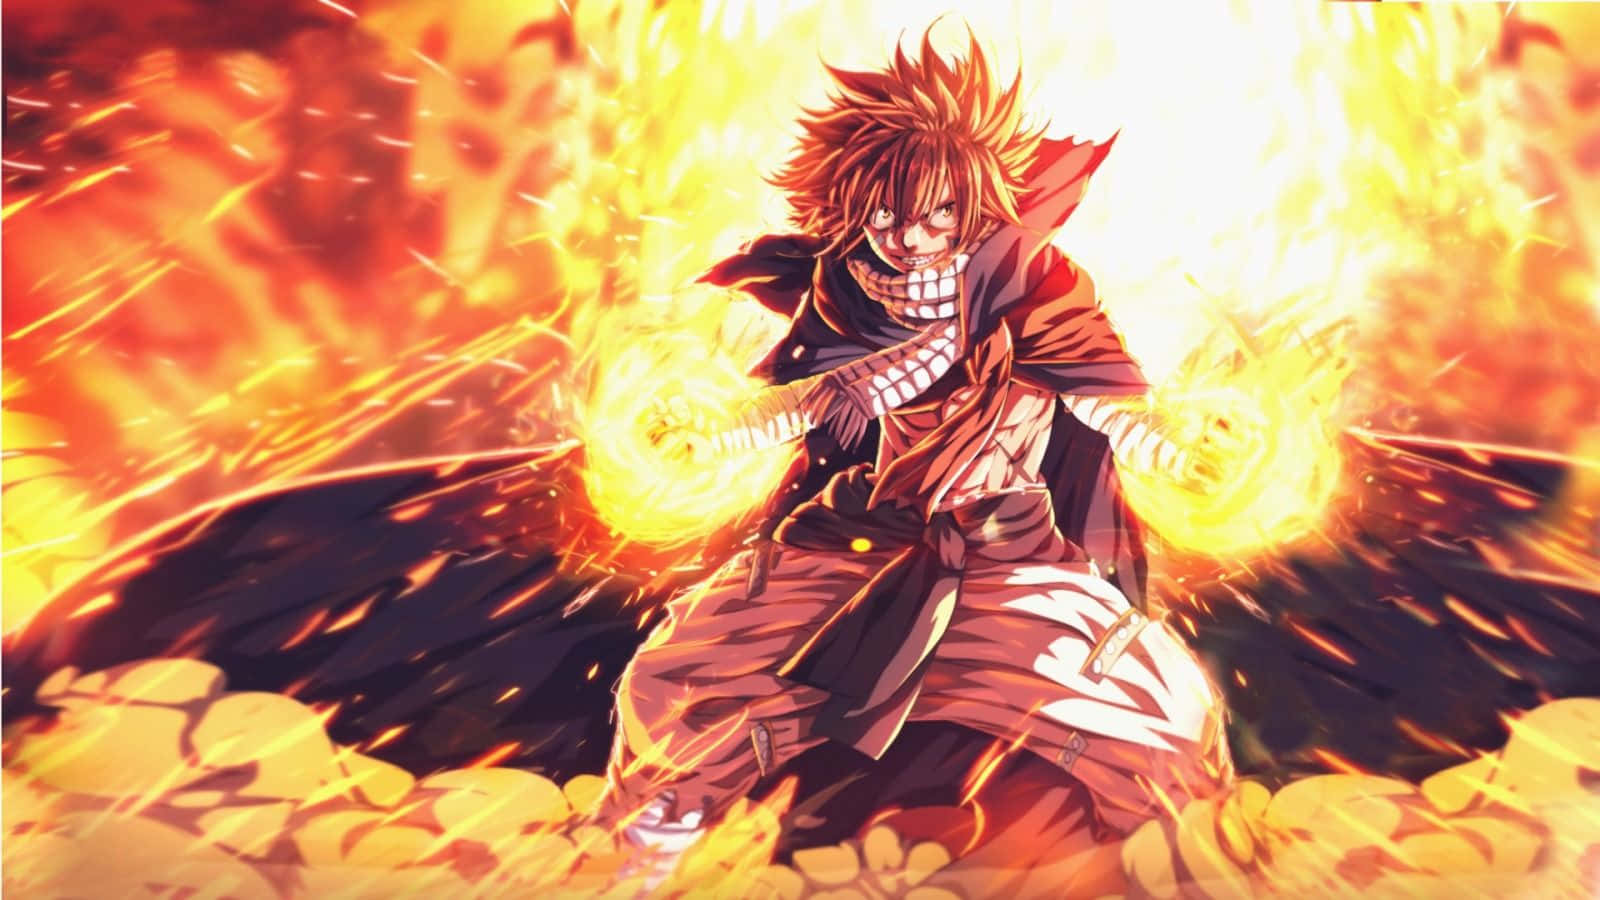 A Character With A Flame In His Hands